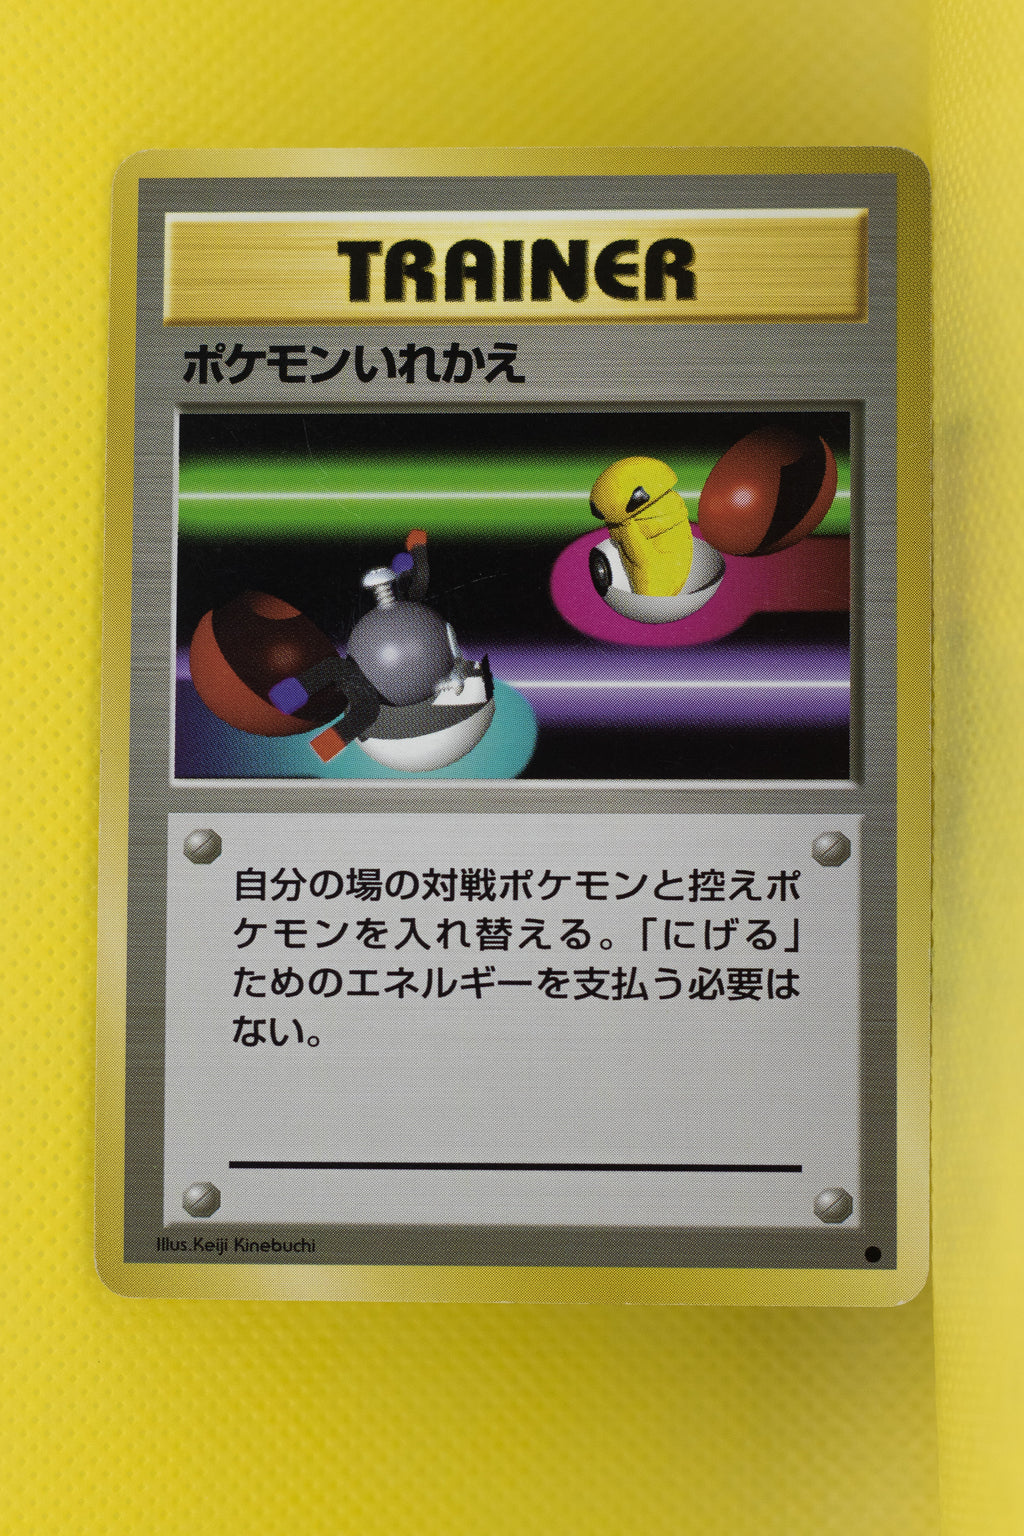 Base Japanese Trainer Switch Common